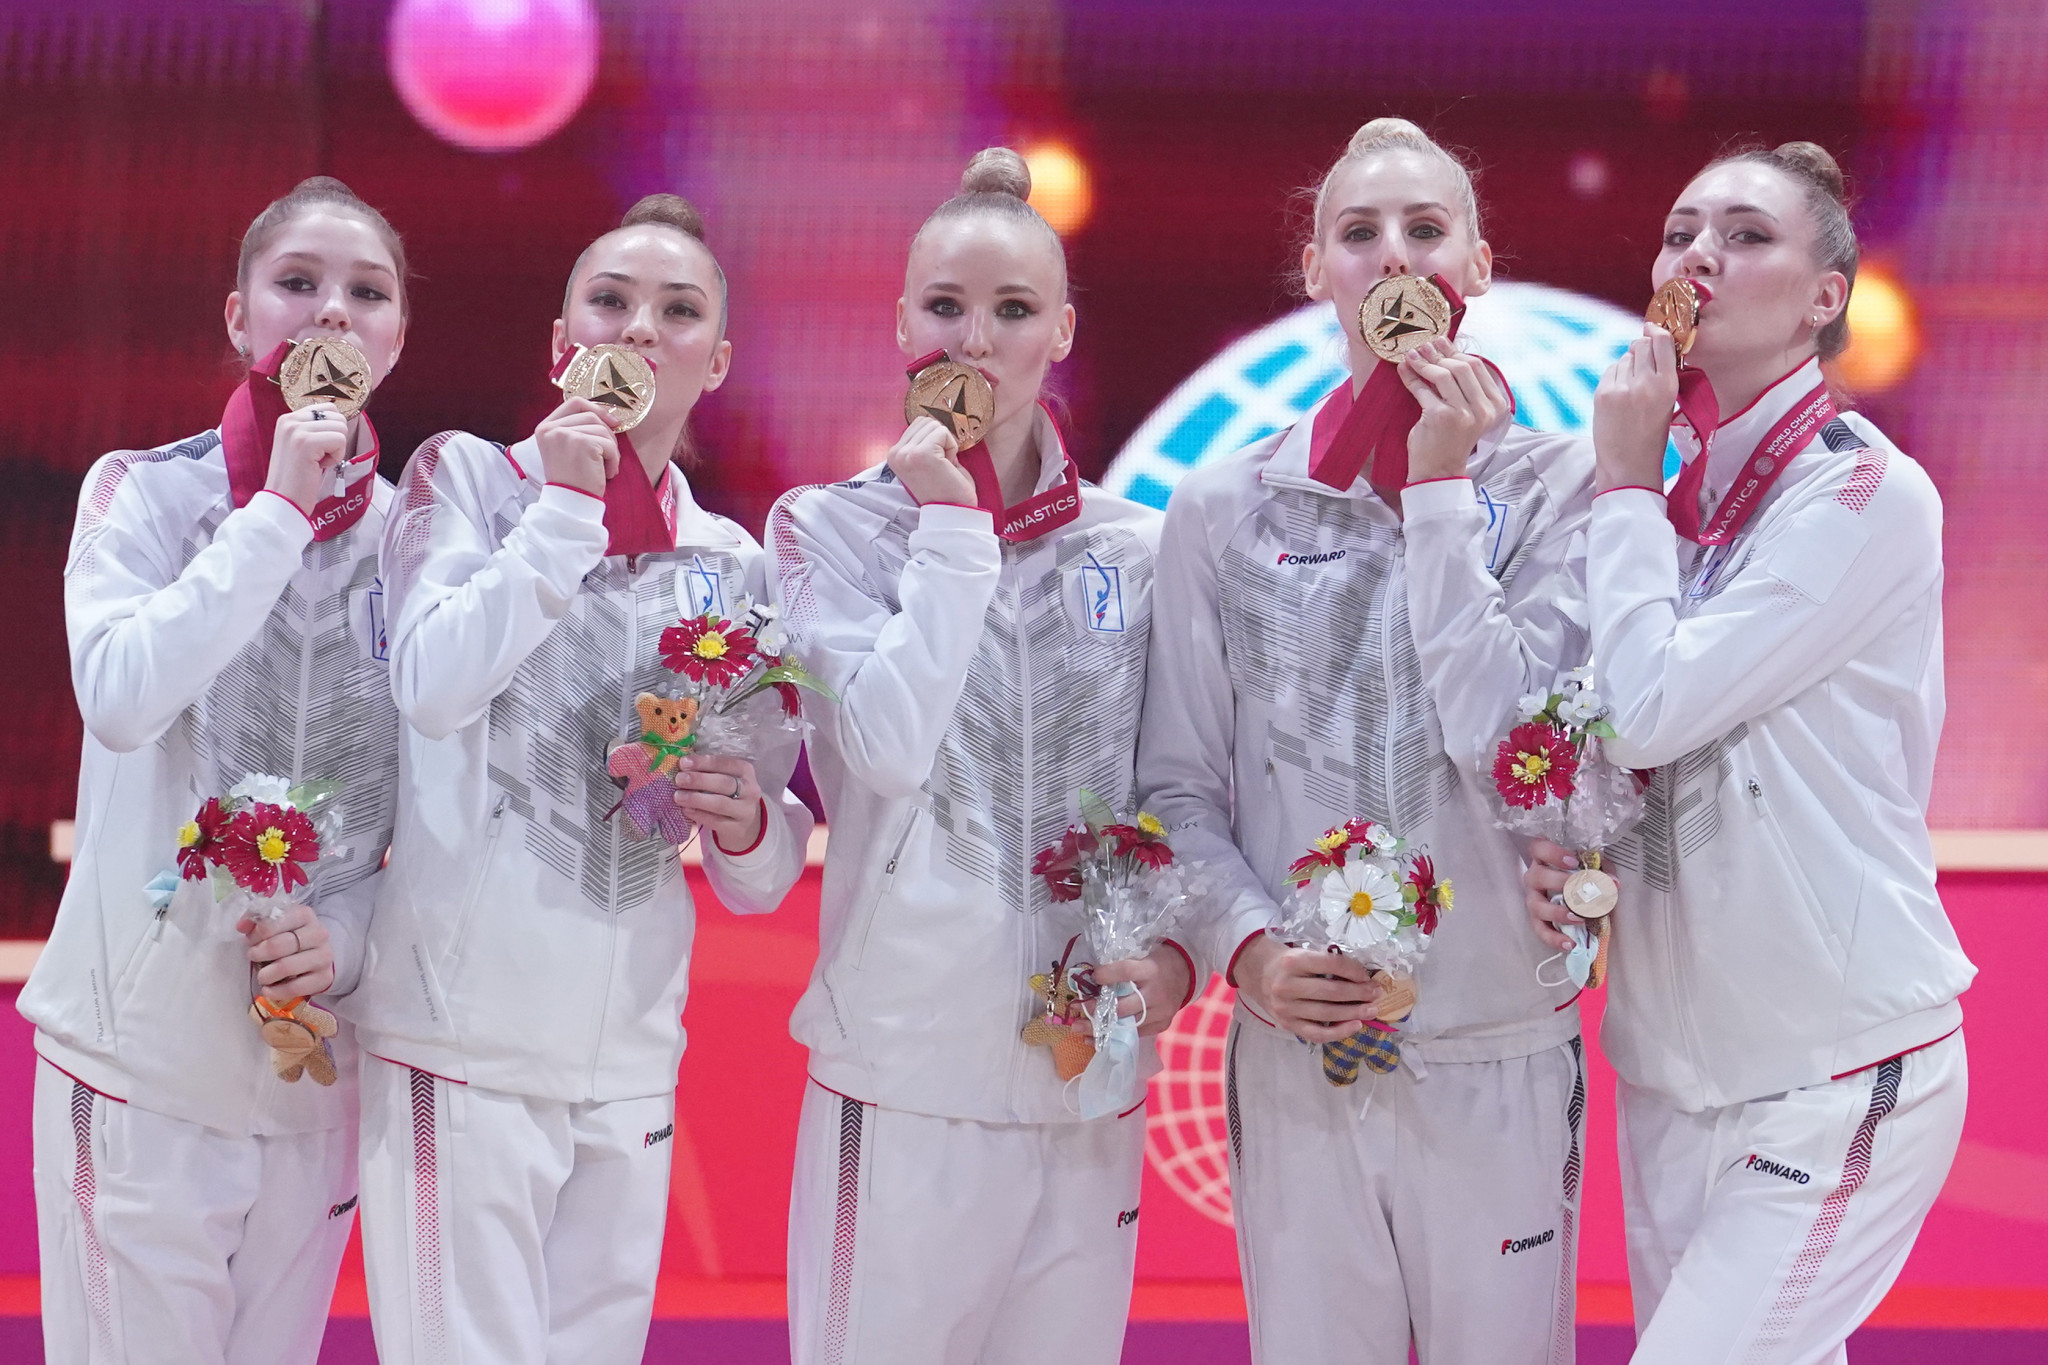 The Russian Gymnastics Federation won its fourth gold medal of the Rhythmic Gymnastics World Championships after success in the group all-around contest ©Getty Images